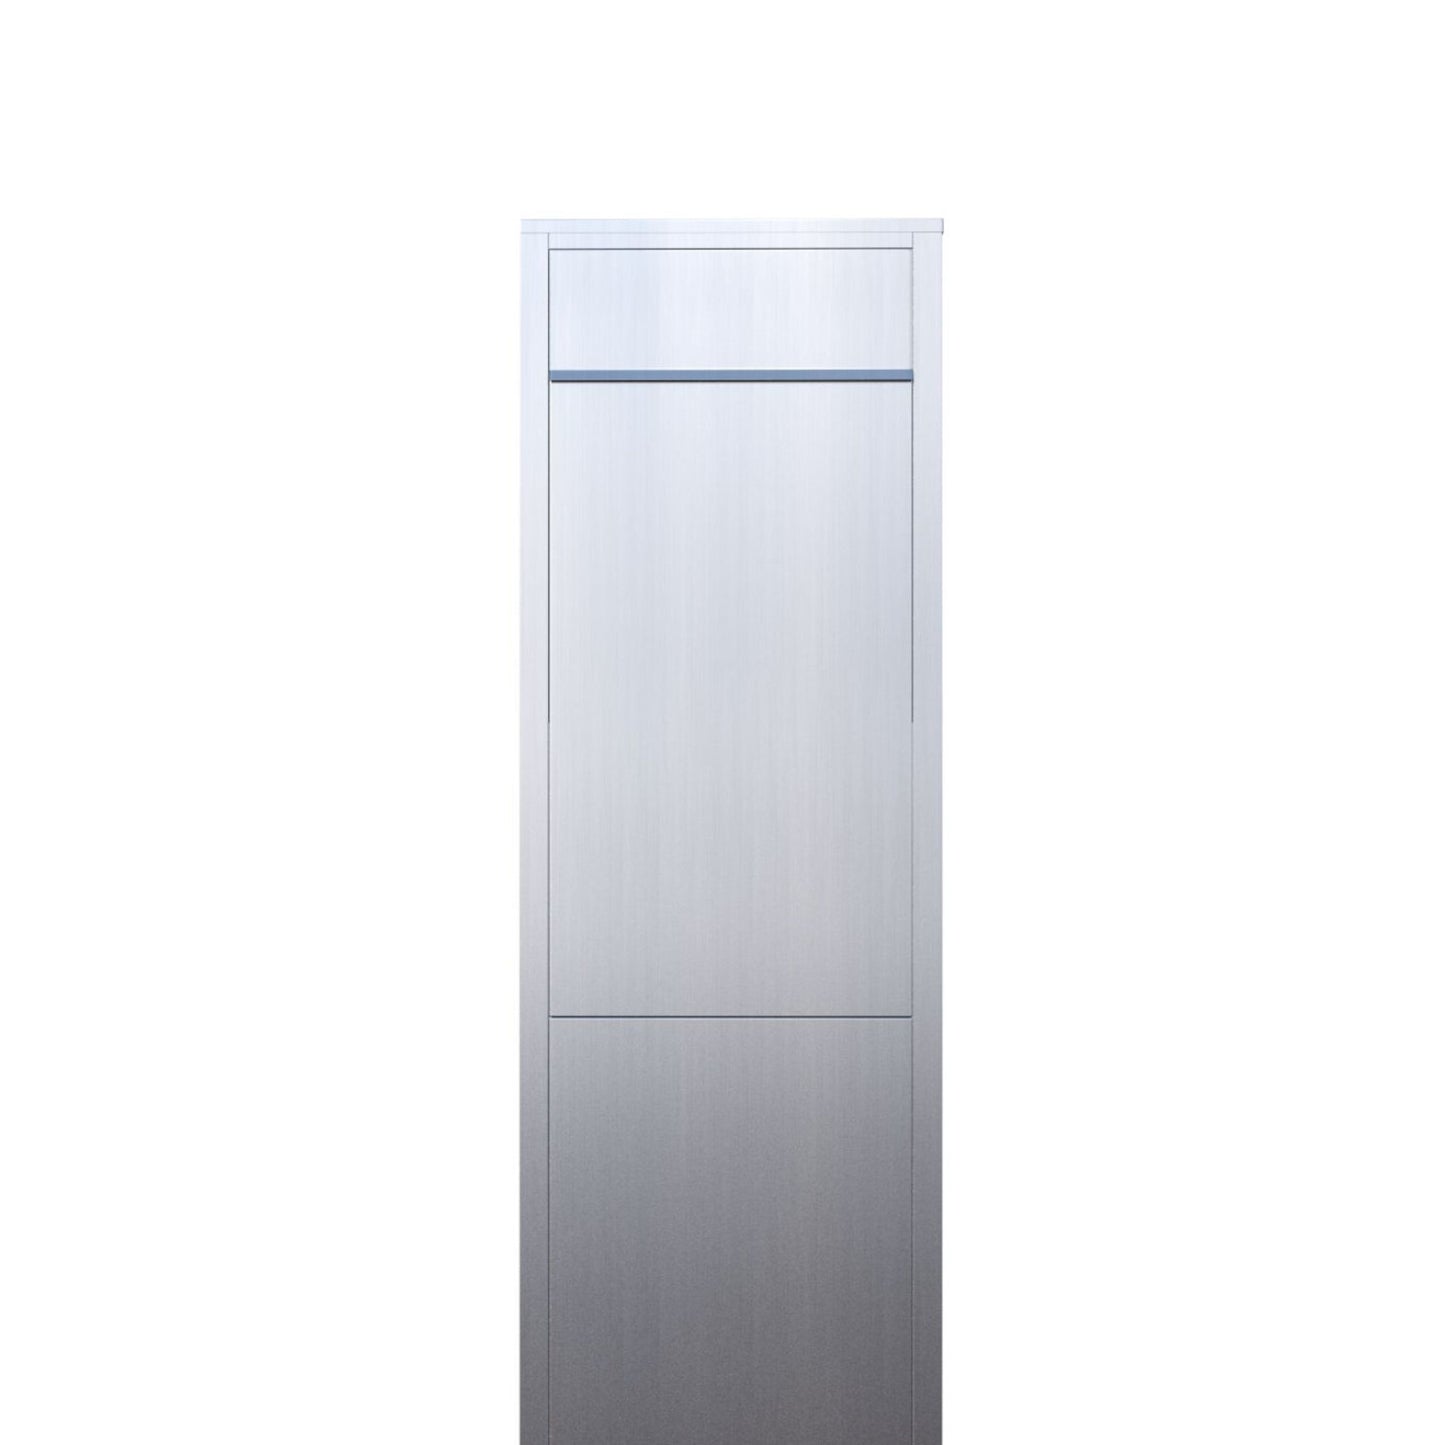 BIG BOX by Bravios - Modern stand-alone mailbox in stainless steel